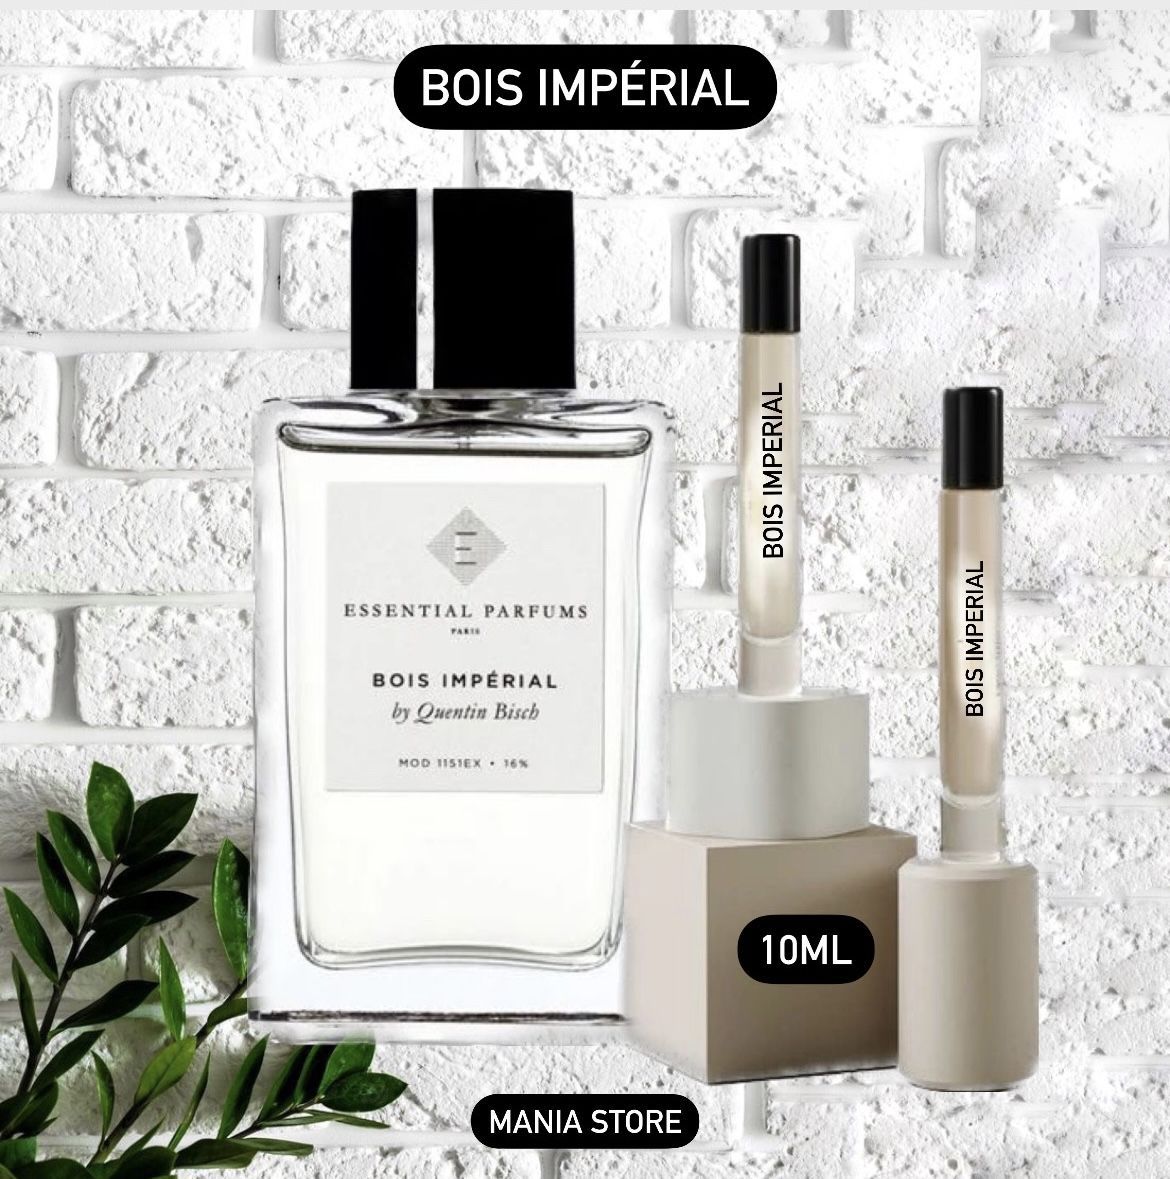 Bois imperial essential parfums limited edition. Том Форд Soleil neige. Tom Ford neige. Tom Ford Soleil neige 100ml. Том Форд белые Soleil neige.